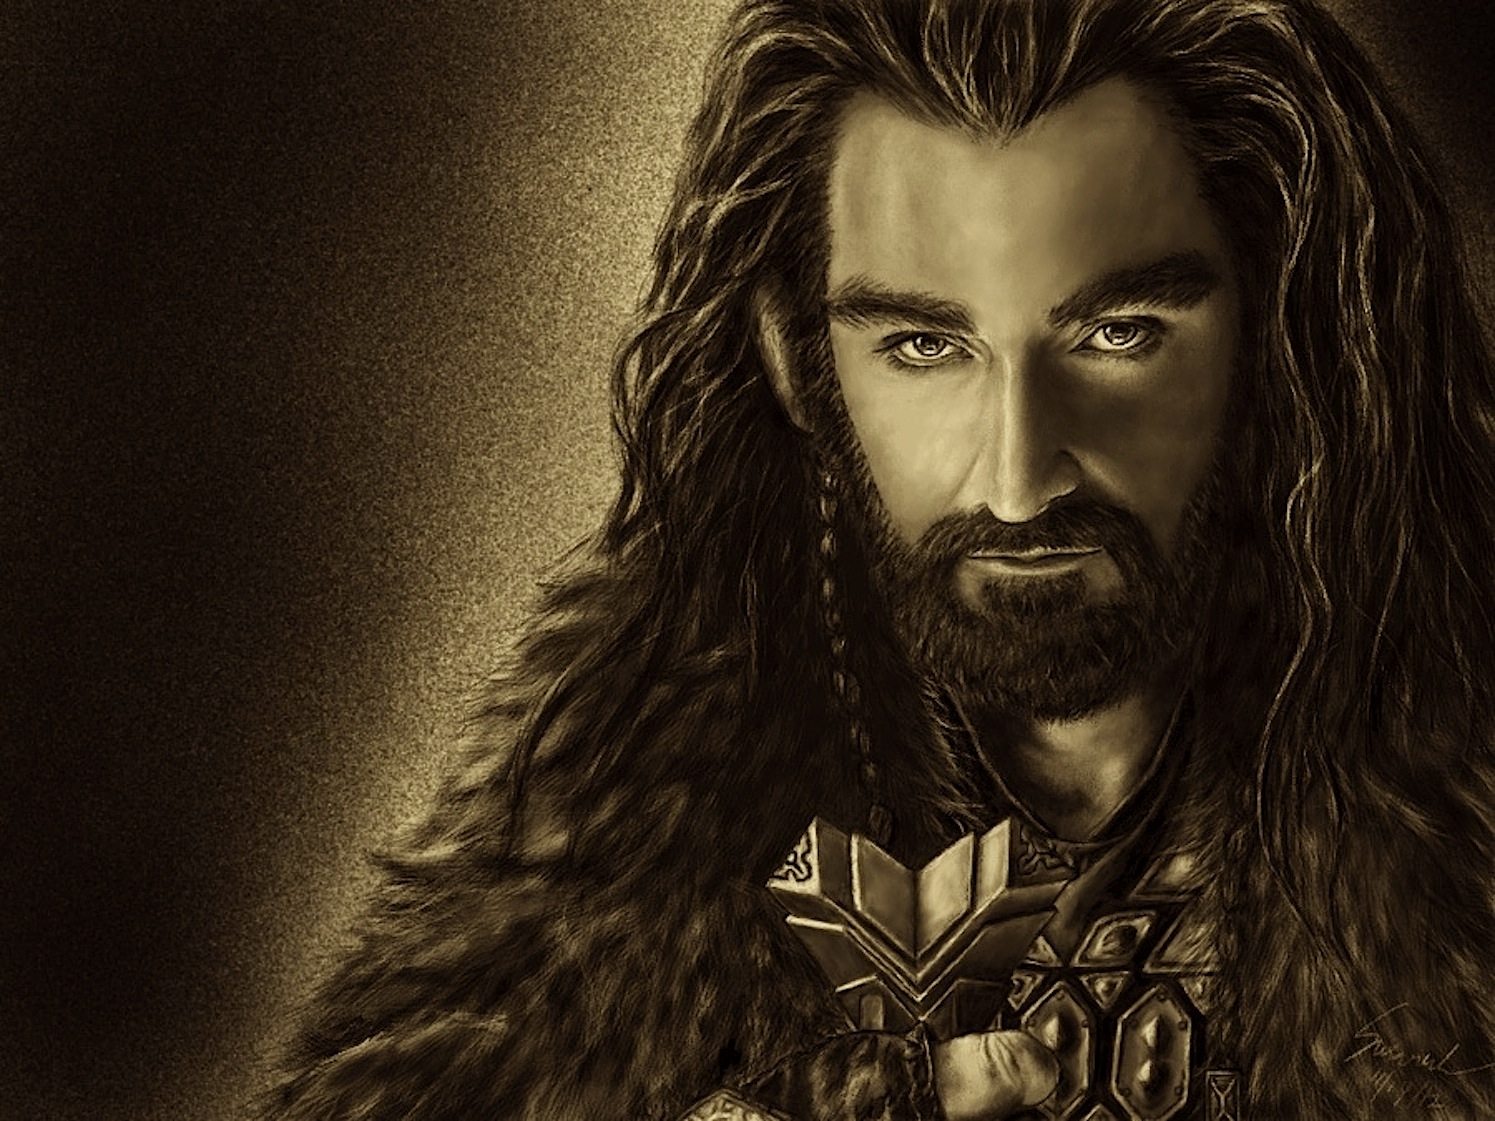 Thorin Oakenshield by Nhyms on DeviantArt